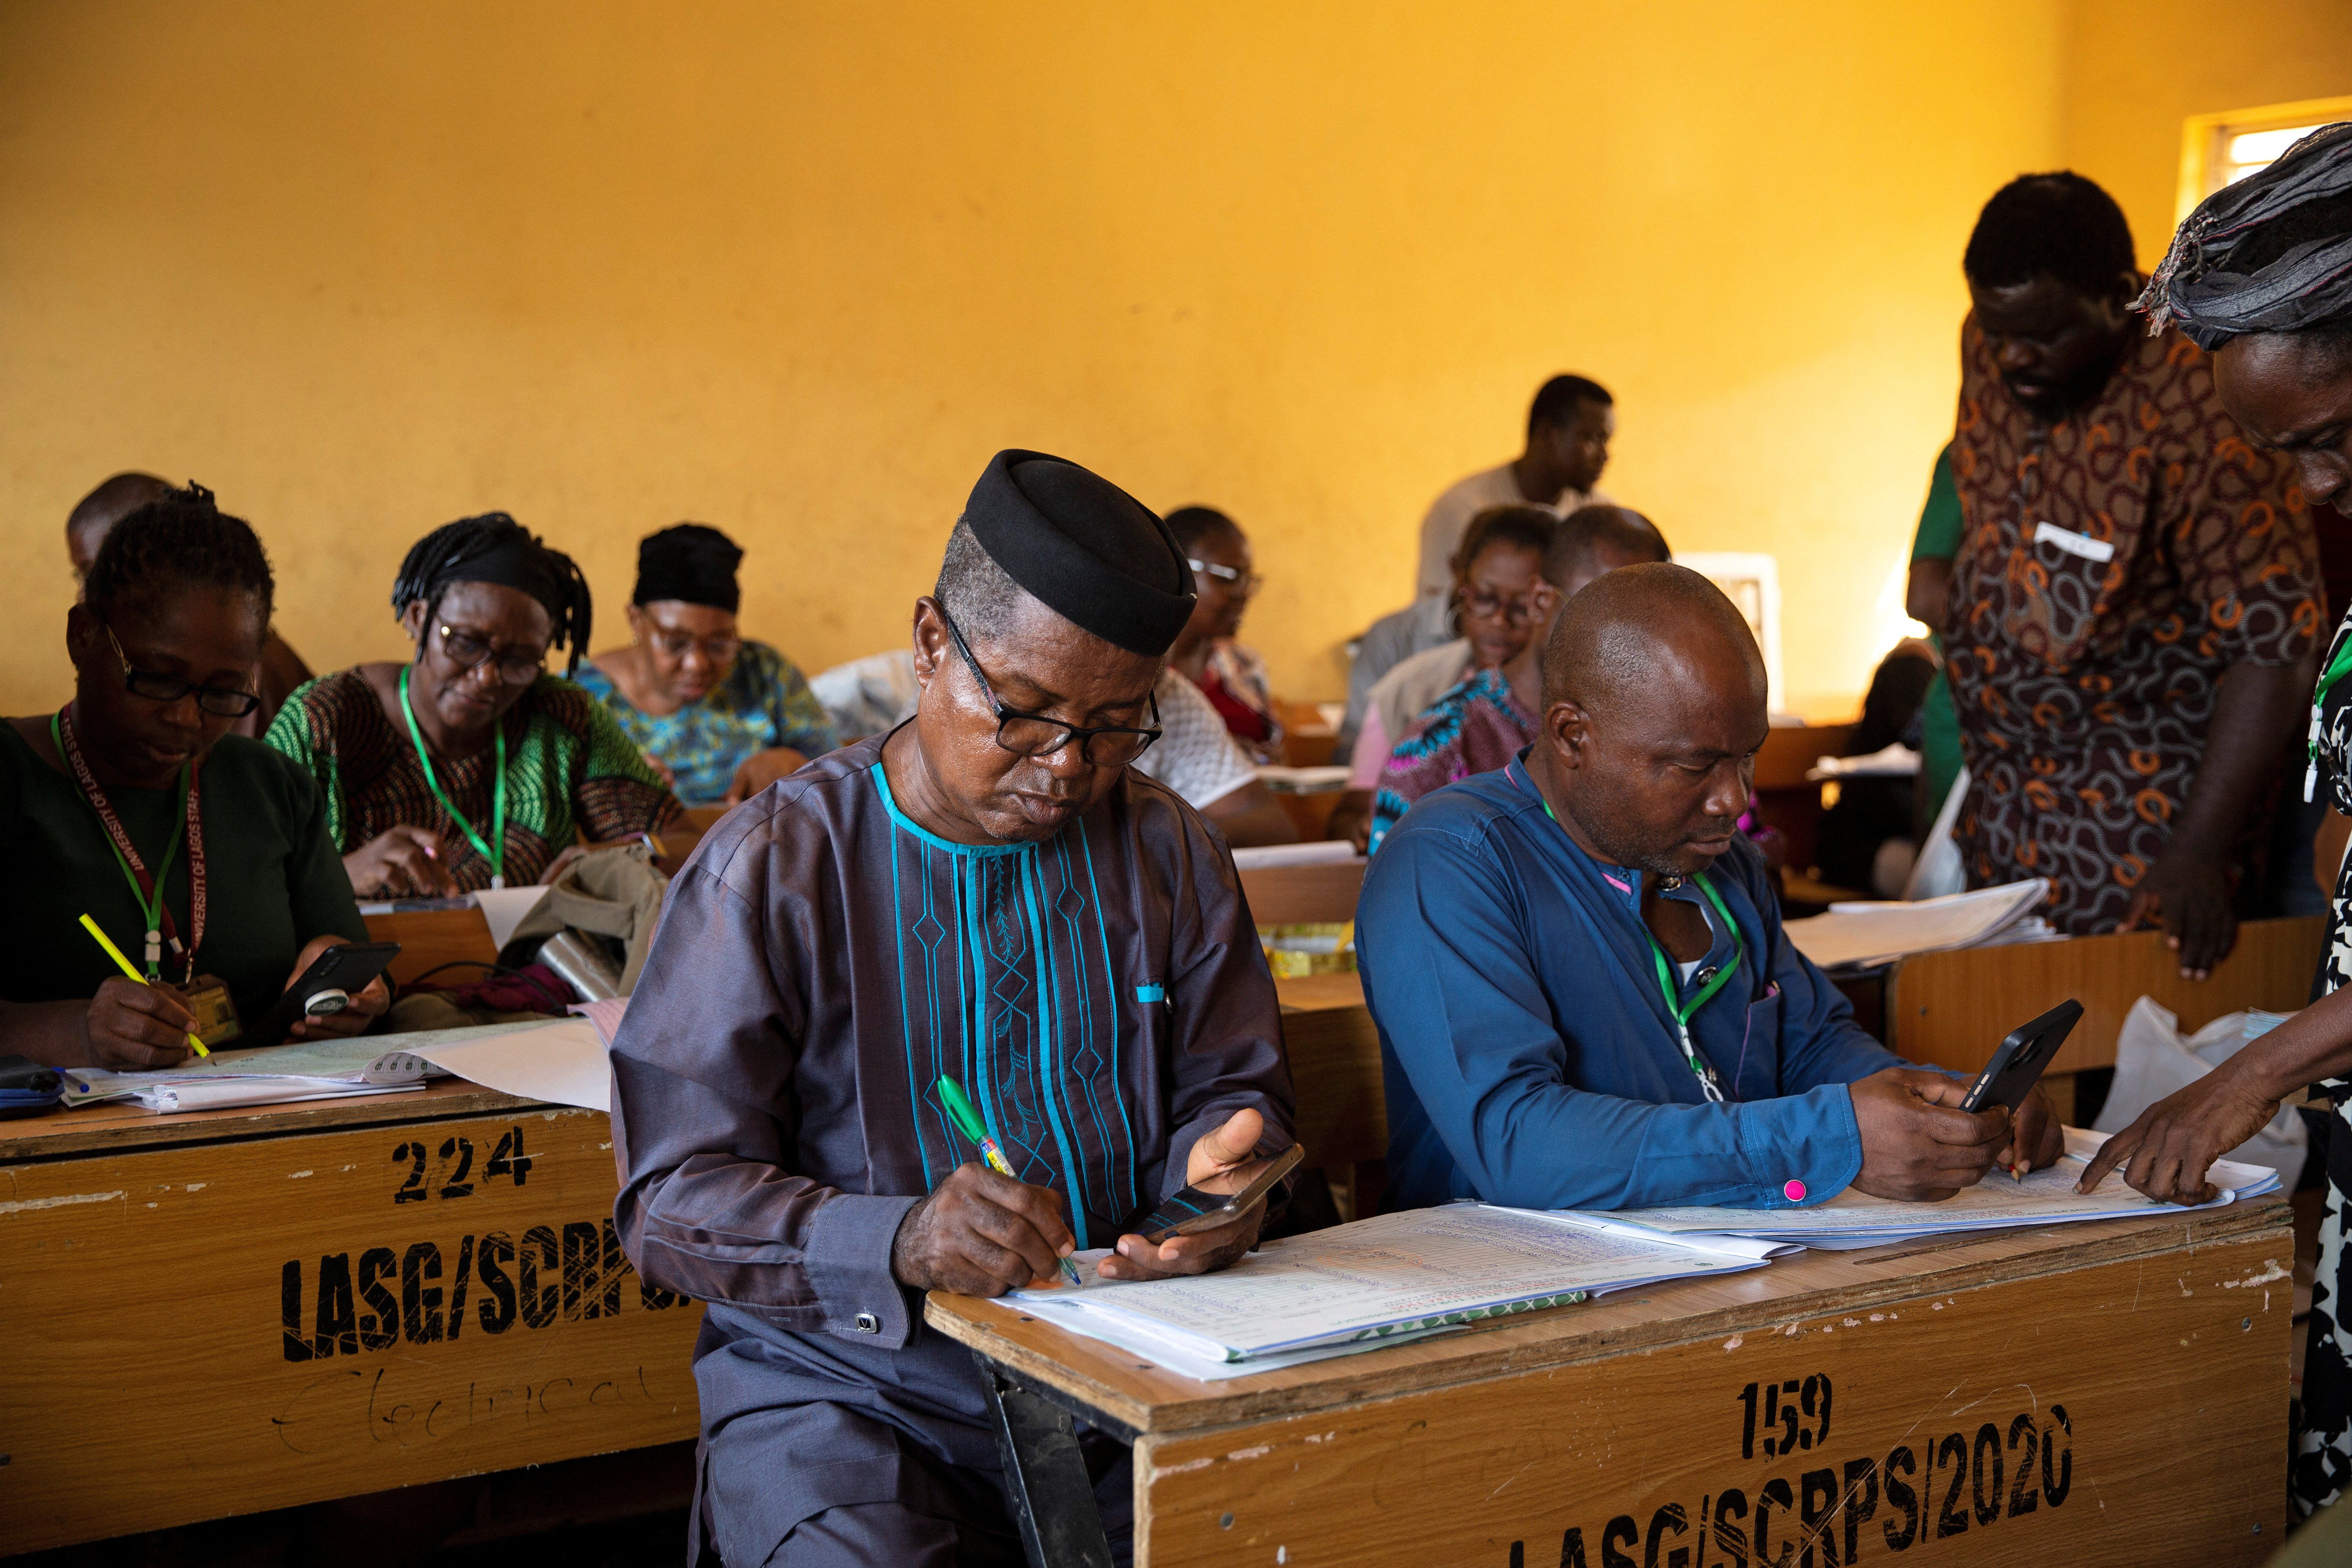 A day after the elections, officials tally votes at a collation centre previously stormed by unknown assailants in Lagos, Nigeria on February 26, 2023.